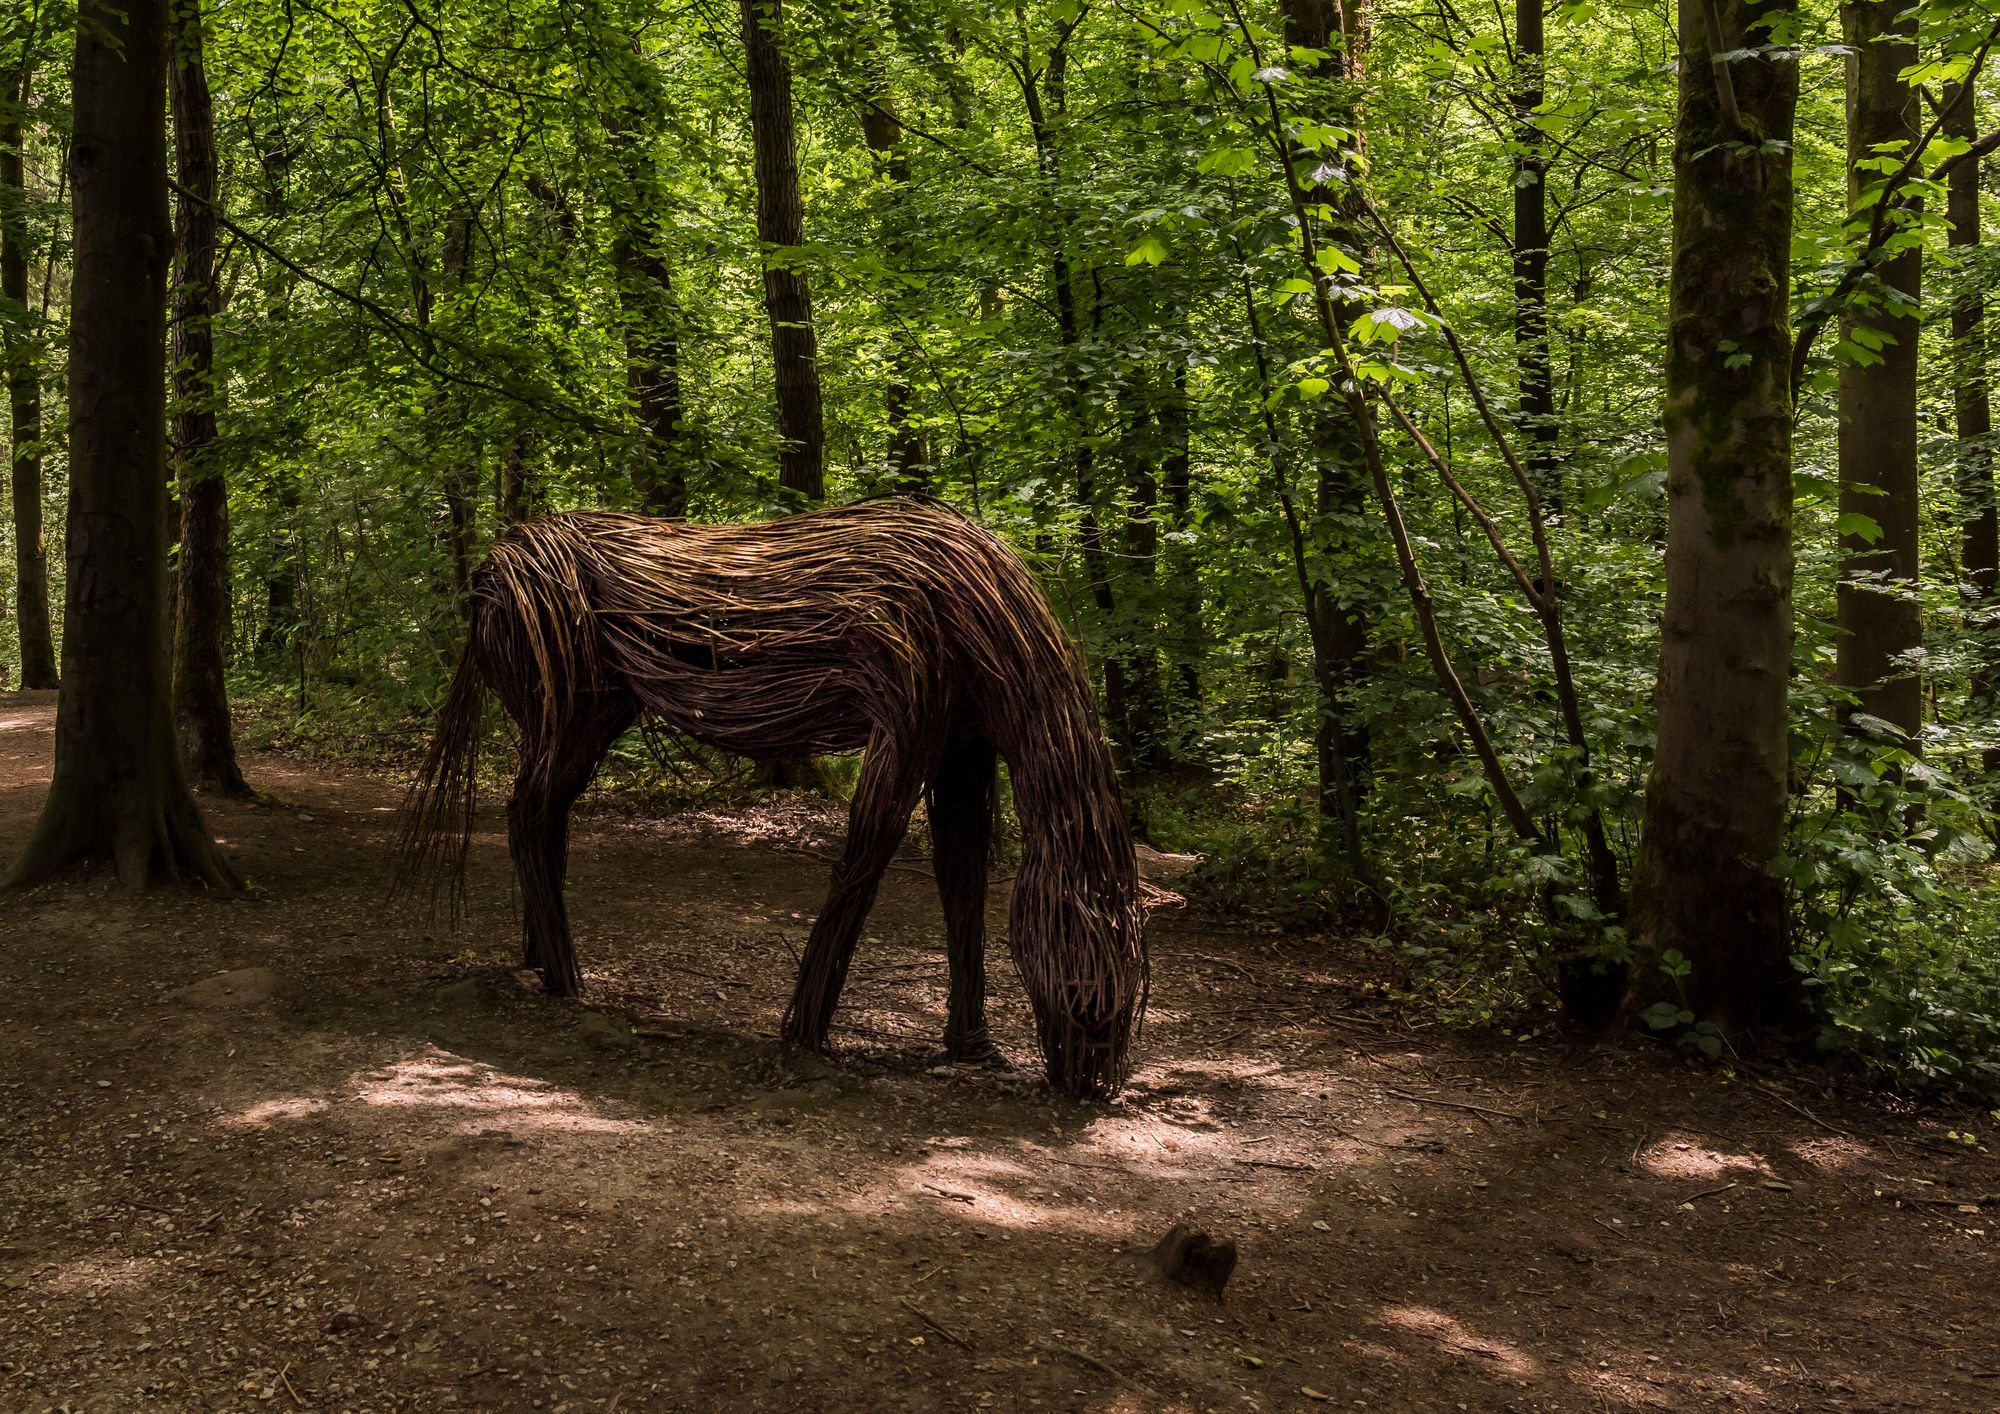 Full-size sculpture of a horse, made from wood